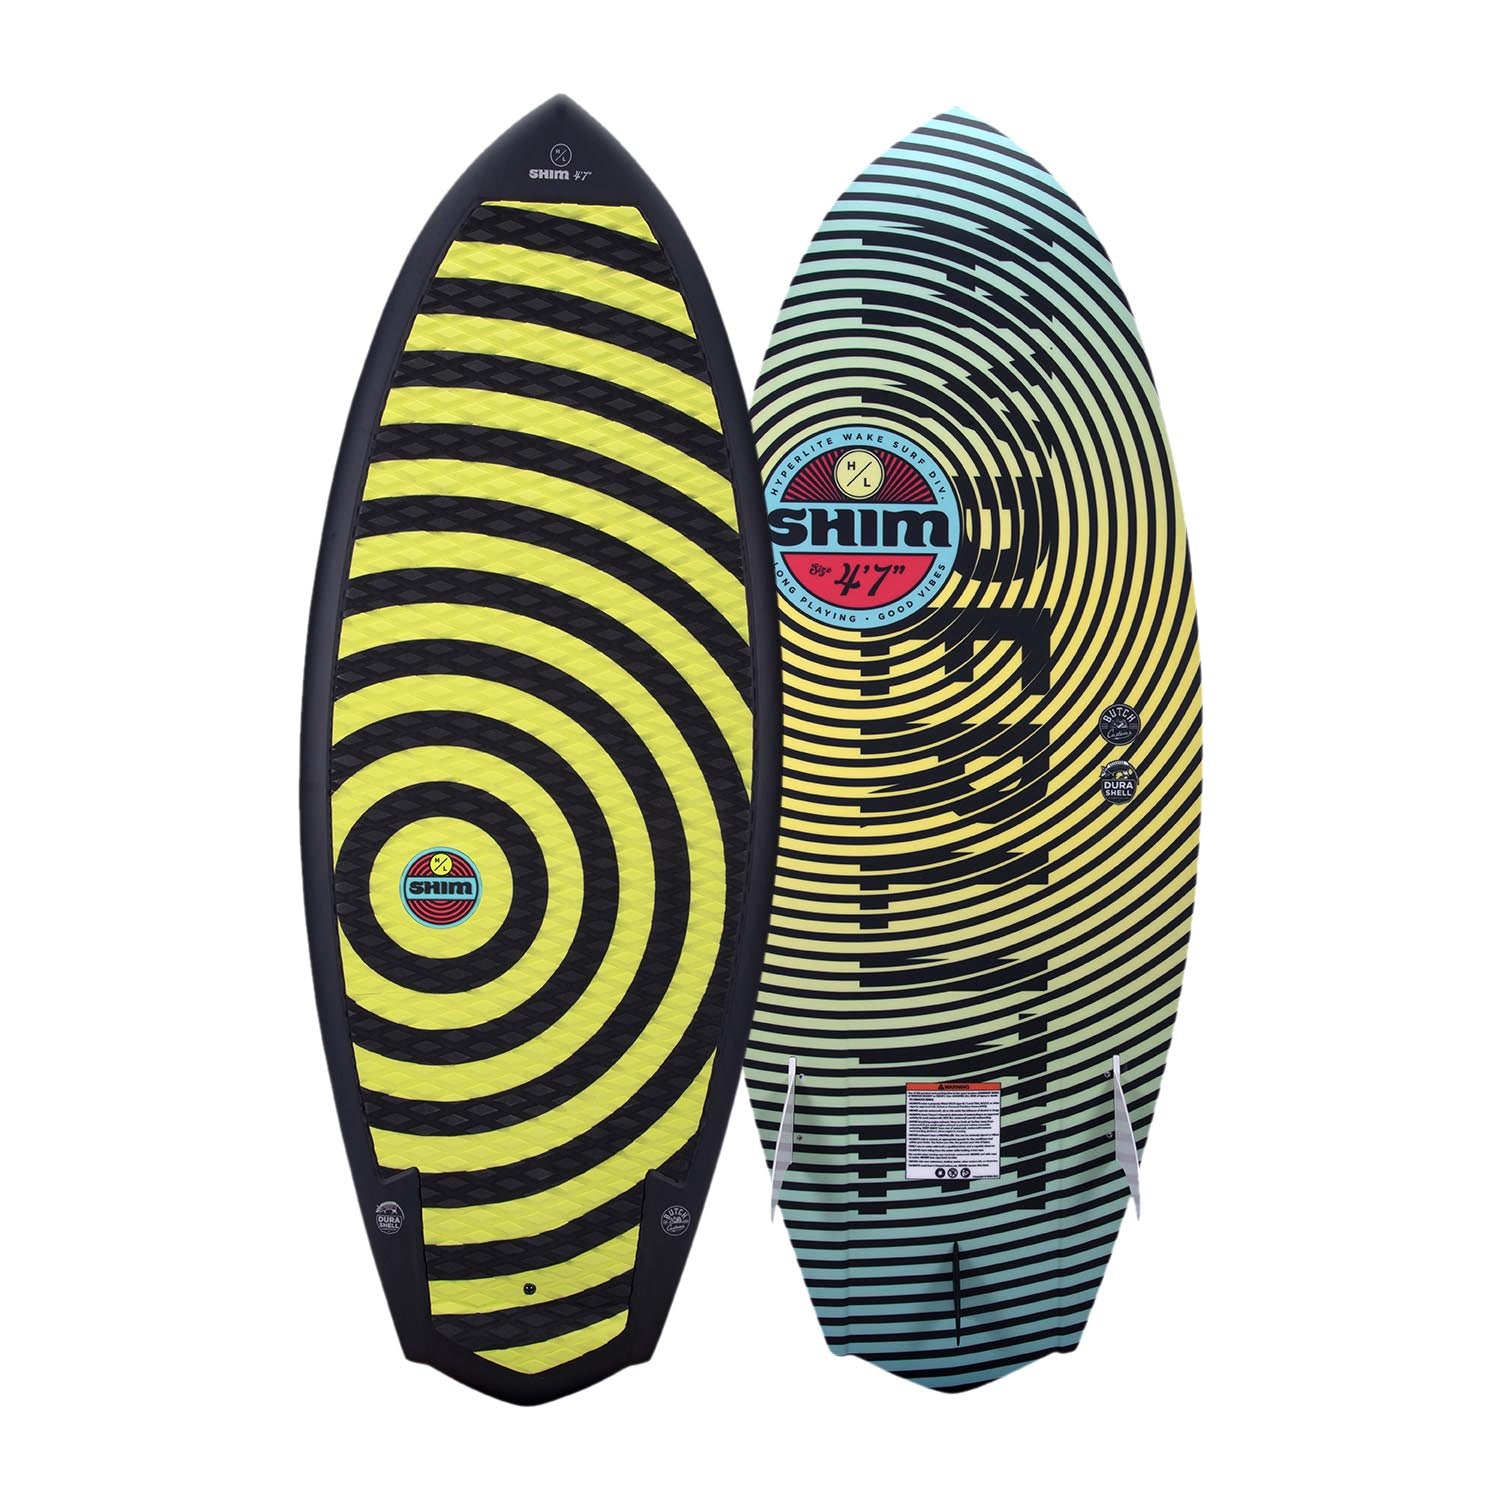 A HYPERLITE Shim 2023 wakeboard with a yellow and black design, featuring surf style characteristics.